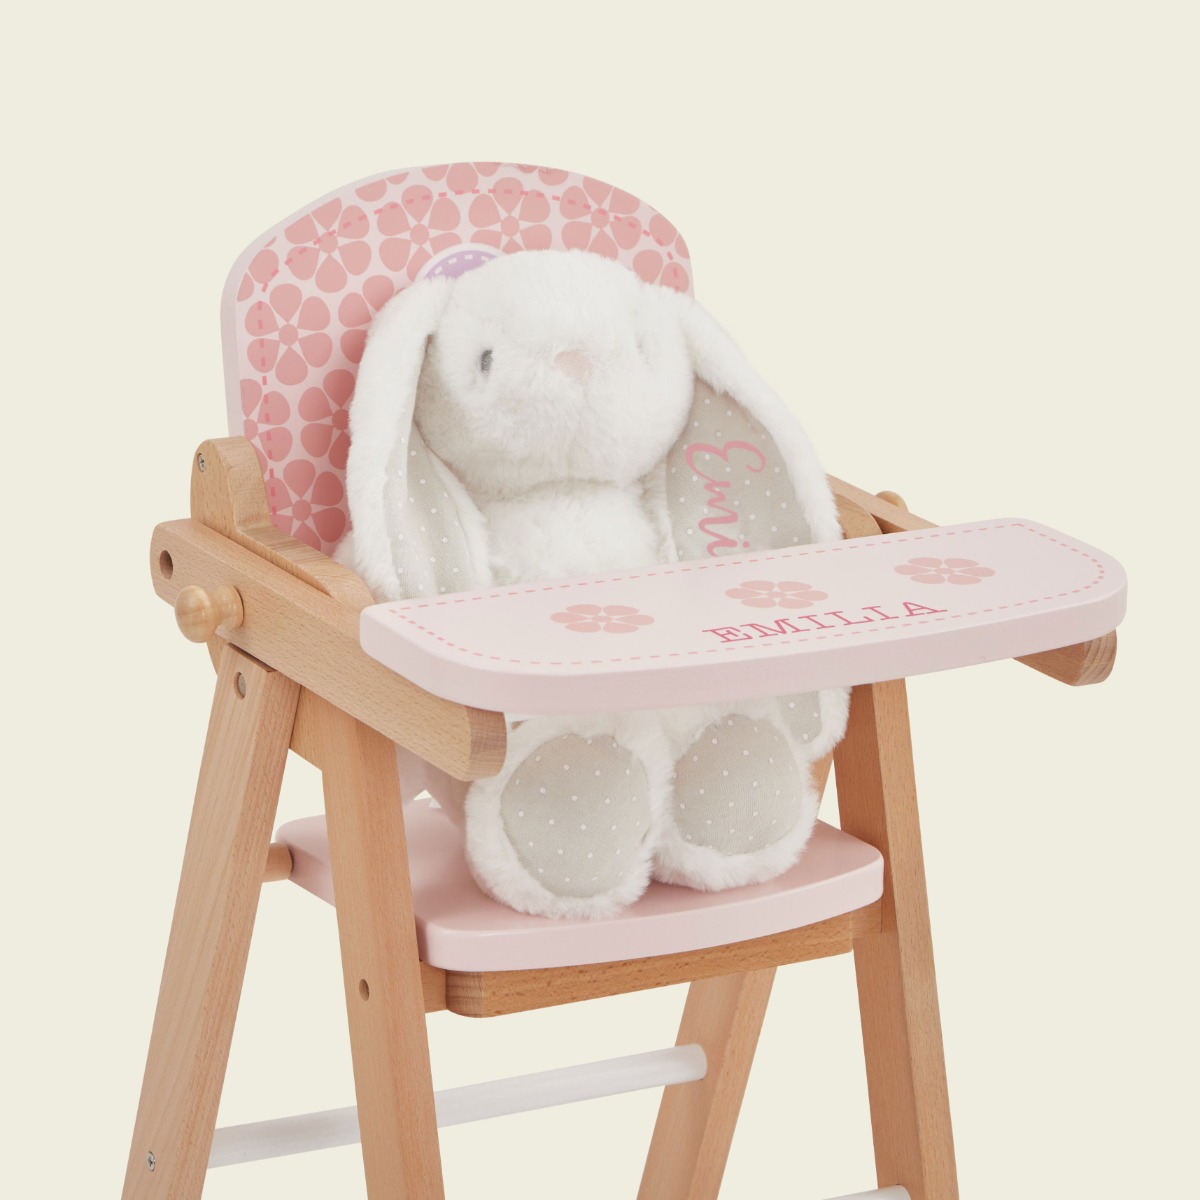 Personalised Tidlo Wooden Dolls High Chair